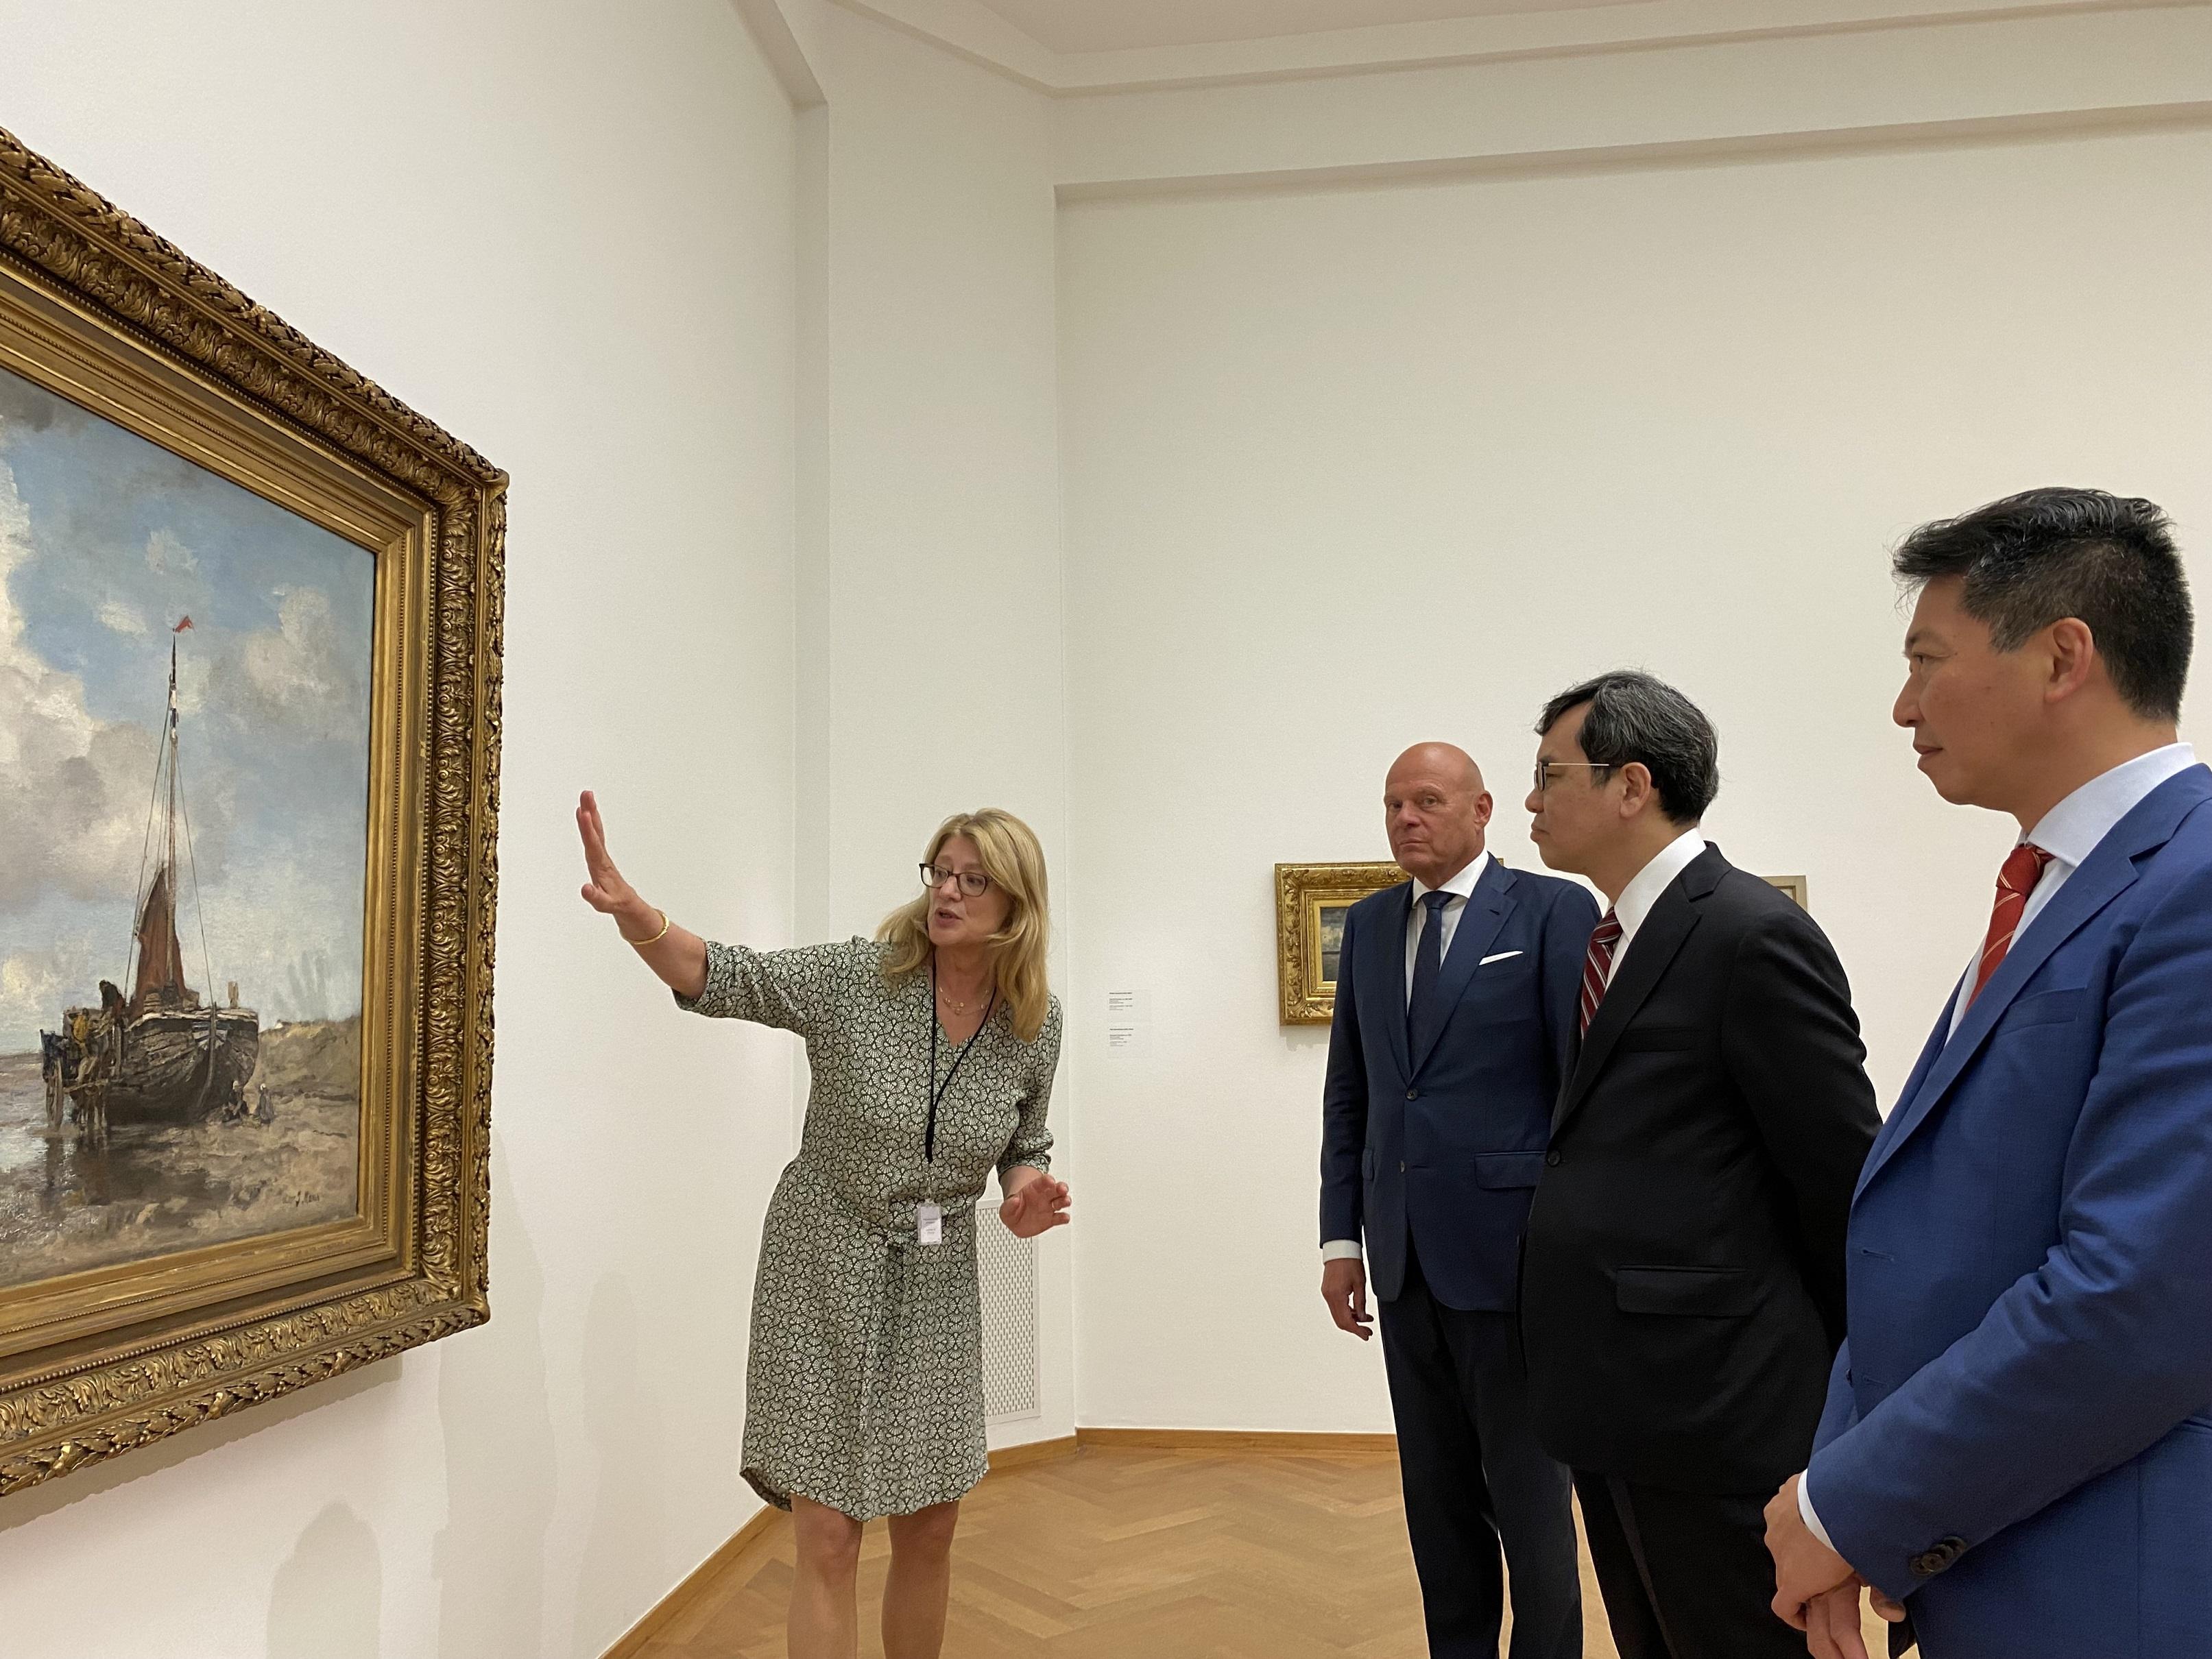 The Special Representative for Hong Kong Economic and Trade Affairs to the European Union, Mr Eddie Cheung (first right), joins the Chinese Ambassador to the Netherlands Mr Tan Jian (second right), and the Chairman of the Netherlands Hong Kong Business Association, Mr Hans Poulis (third left), among other guests, in a guided tour of the Kunstmuseum as the start of a gala event to celebrate the 25th anniversary of the establishment of the Hong Kong Special Administrative Region in The Hague, the Netherlands, on June 21 (The Hague time).